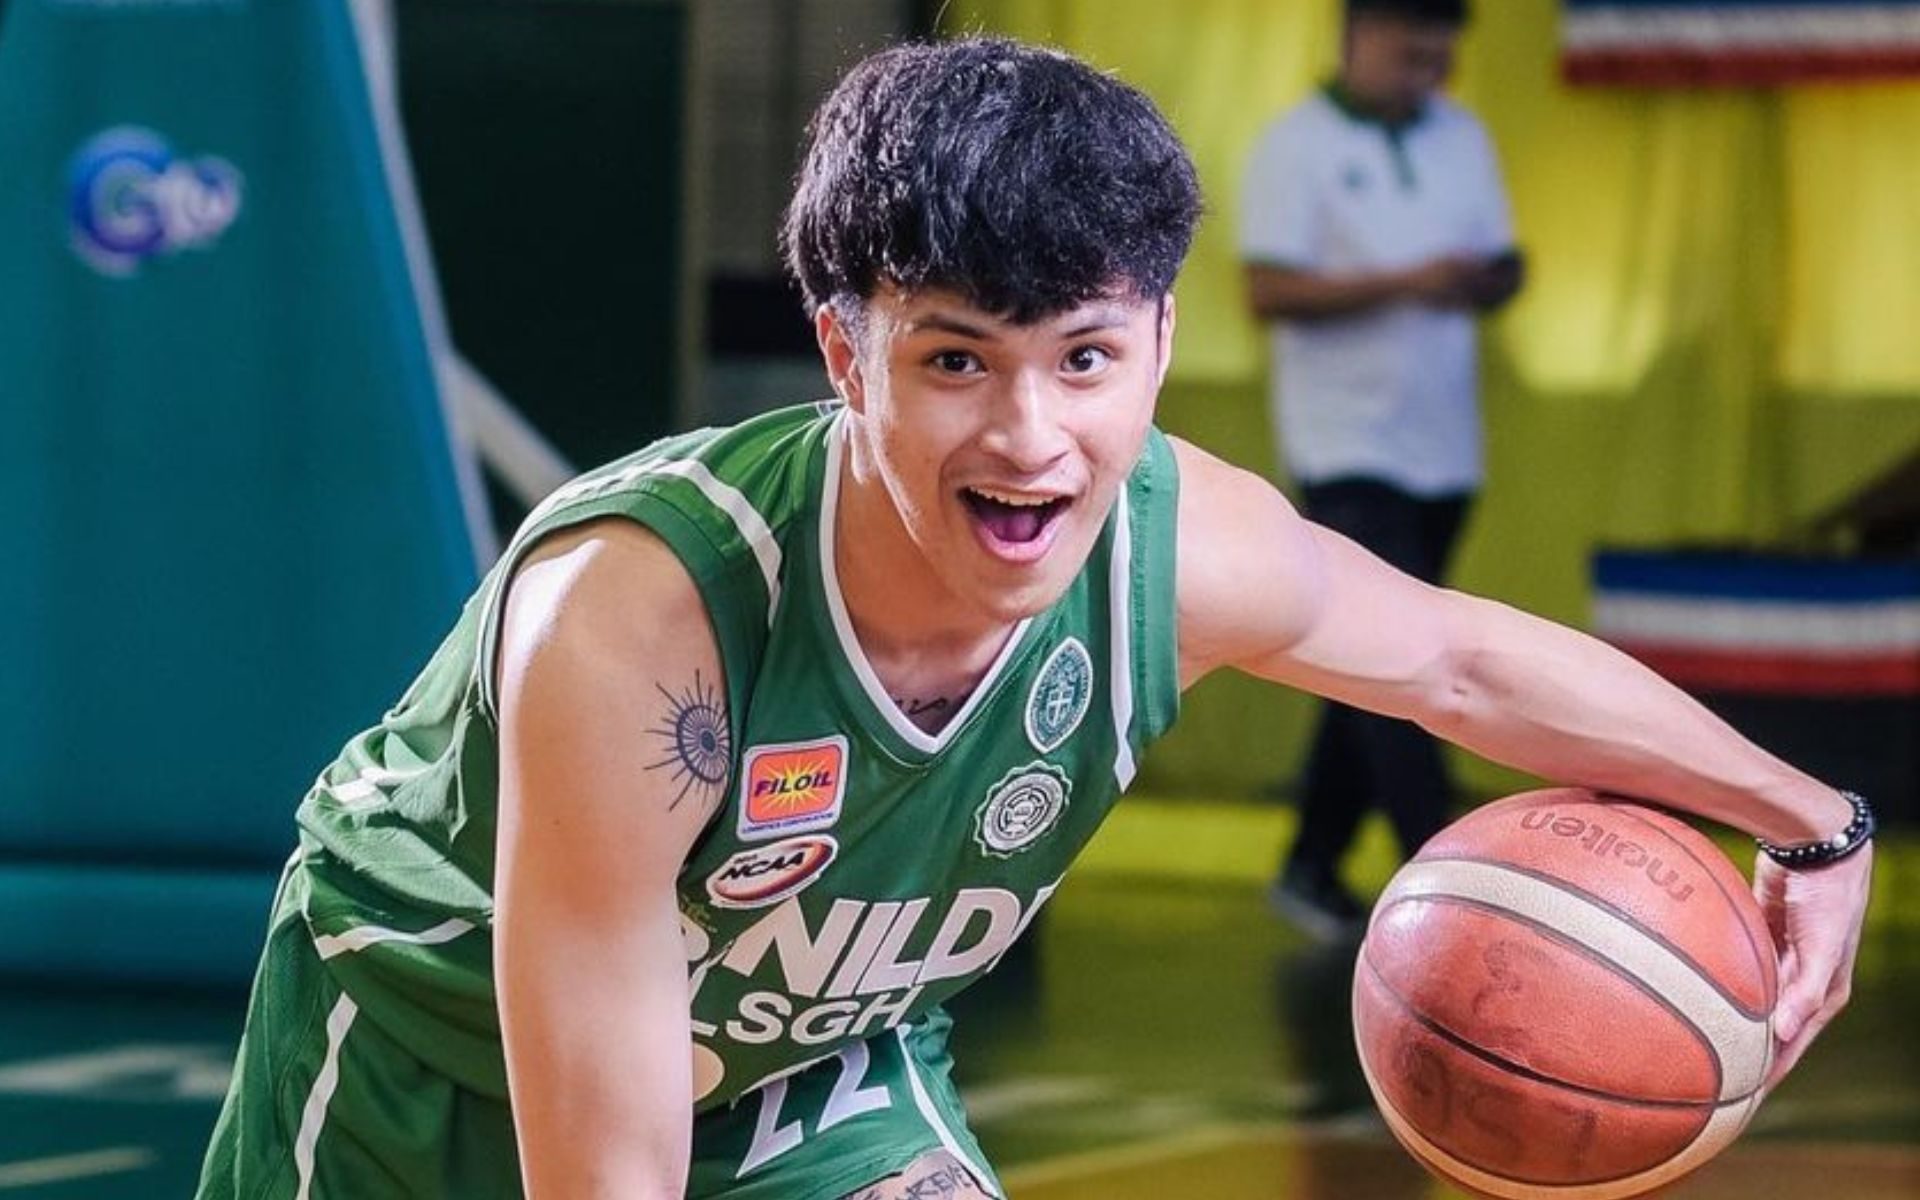 LSGH standout Ethan Alian commits to UAAP’s Green Archers